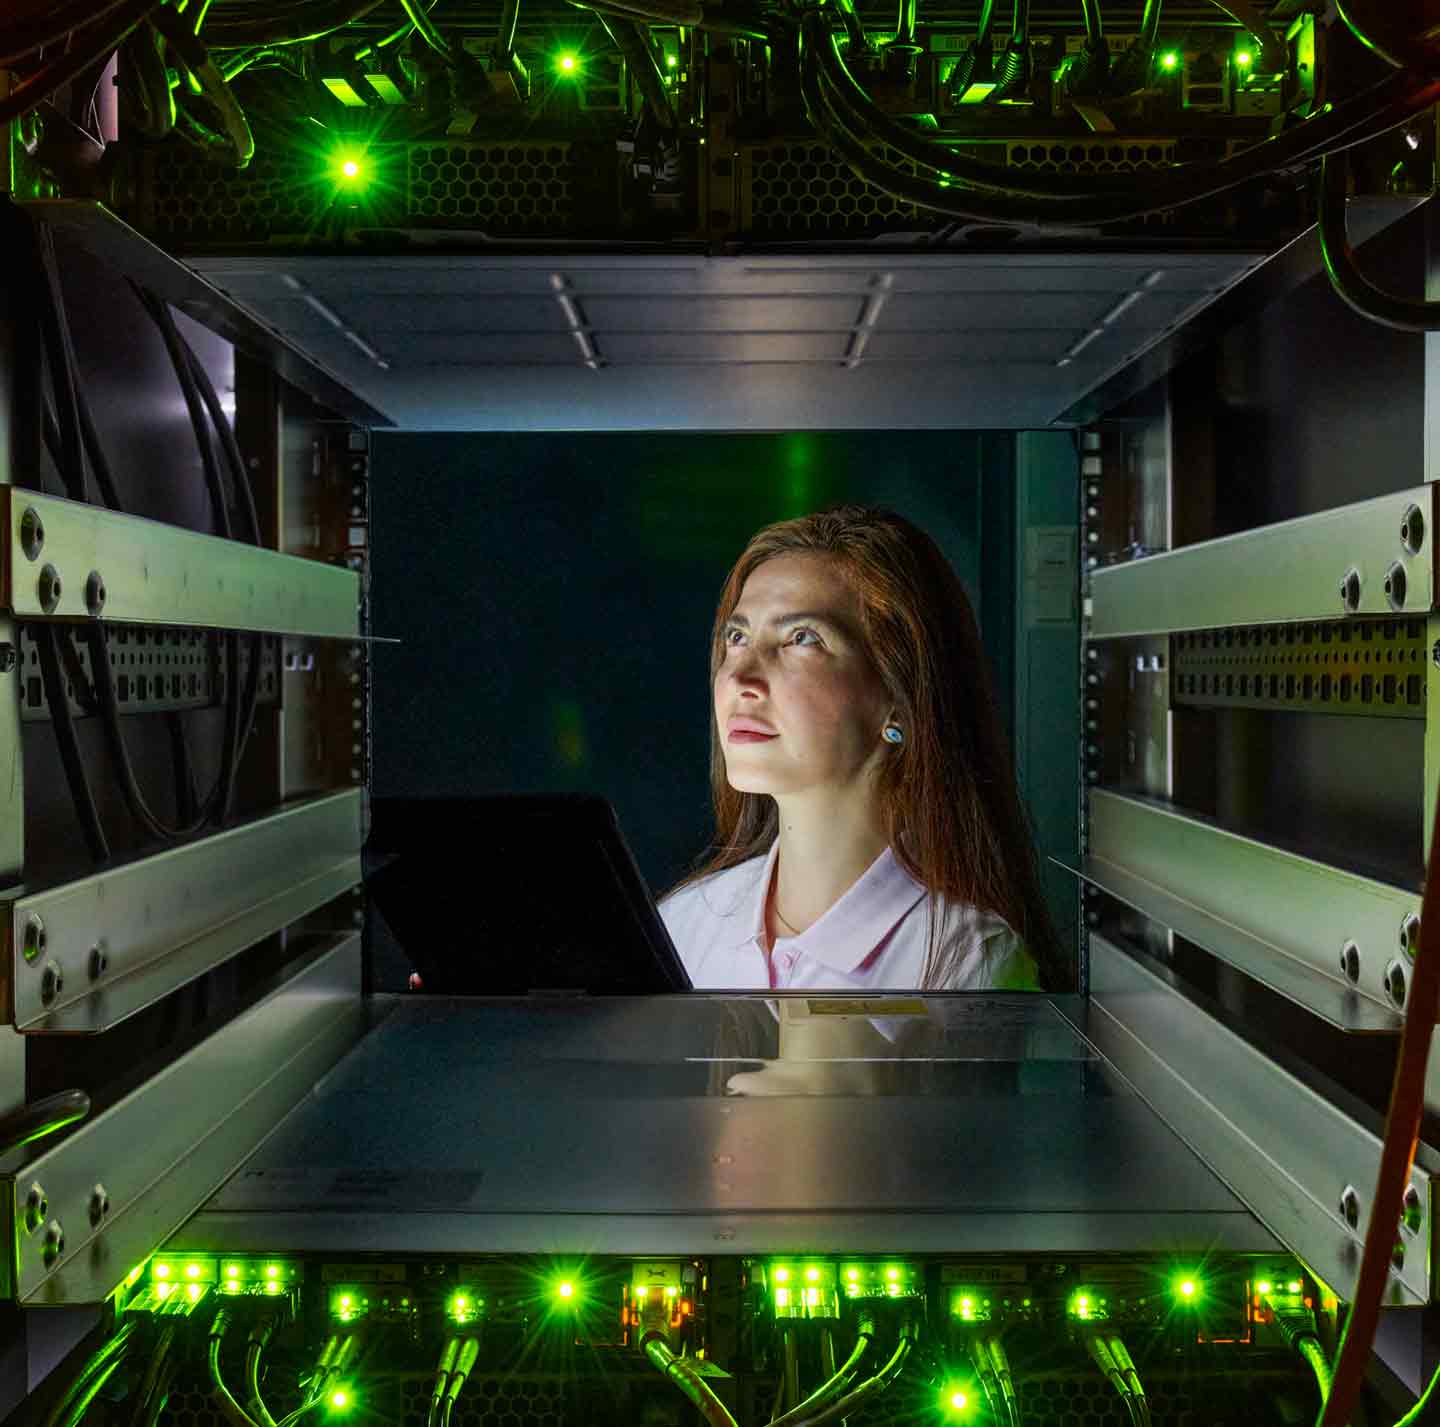 A female looking through a server box with circuit boards and wires